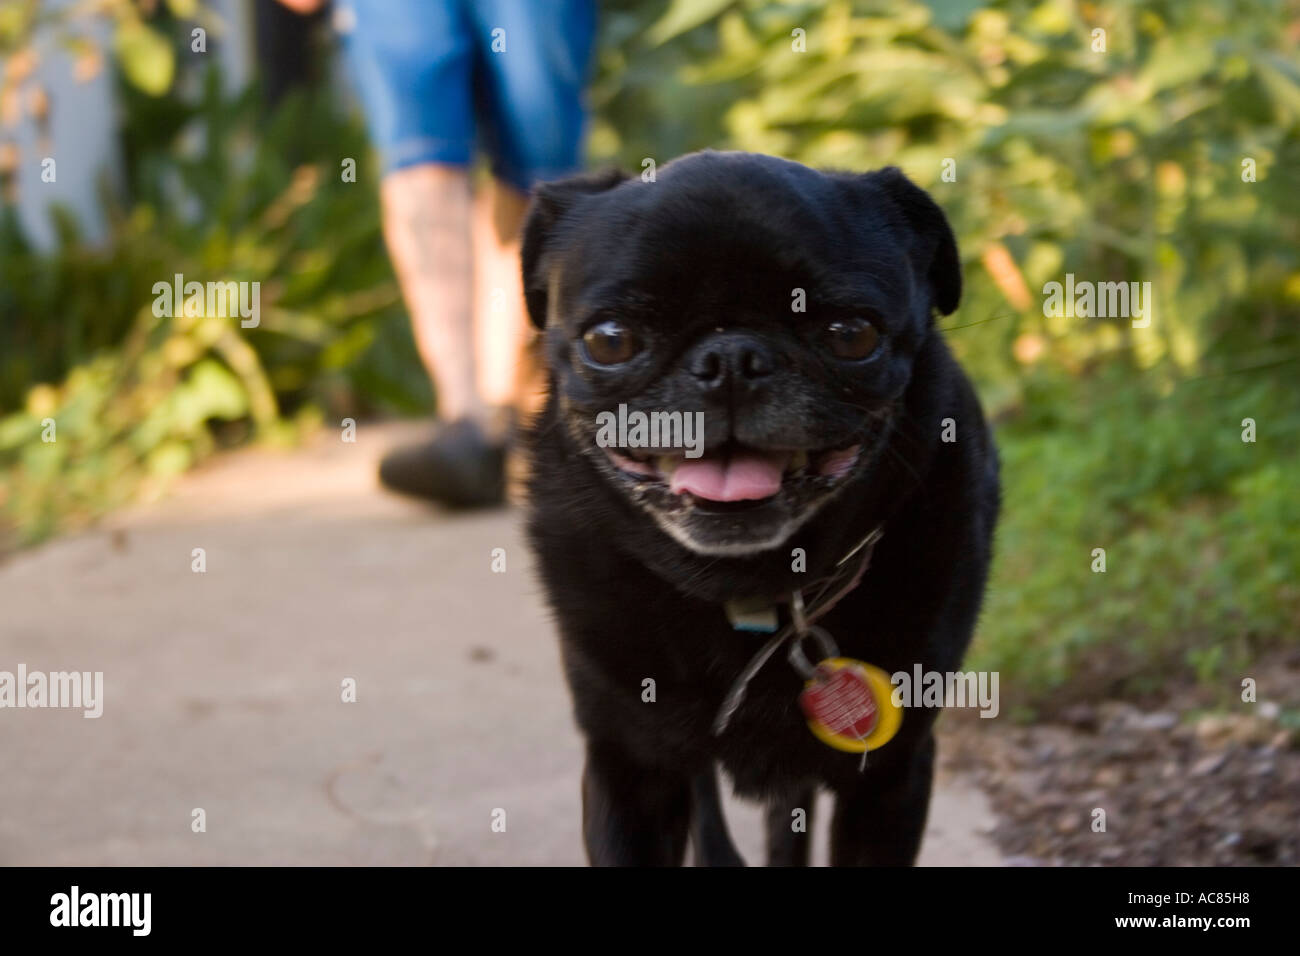 Pug taking a walk with owner, animal black boy collar cute dog domestic focus foreground funny fur furry girl grass green happy Stock Photo